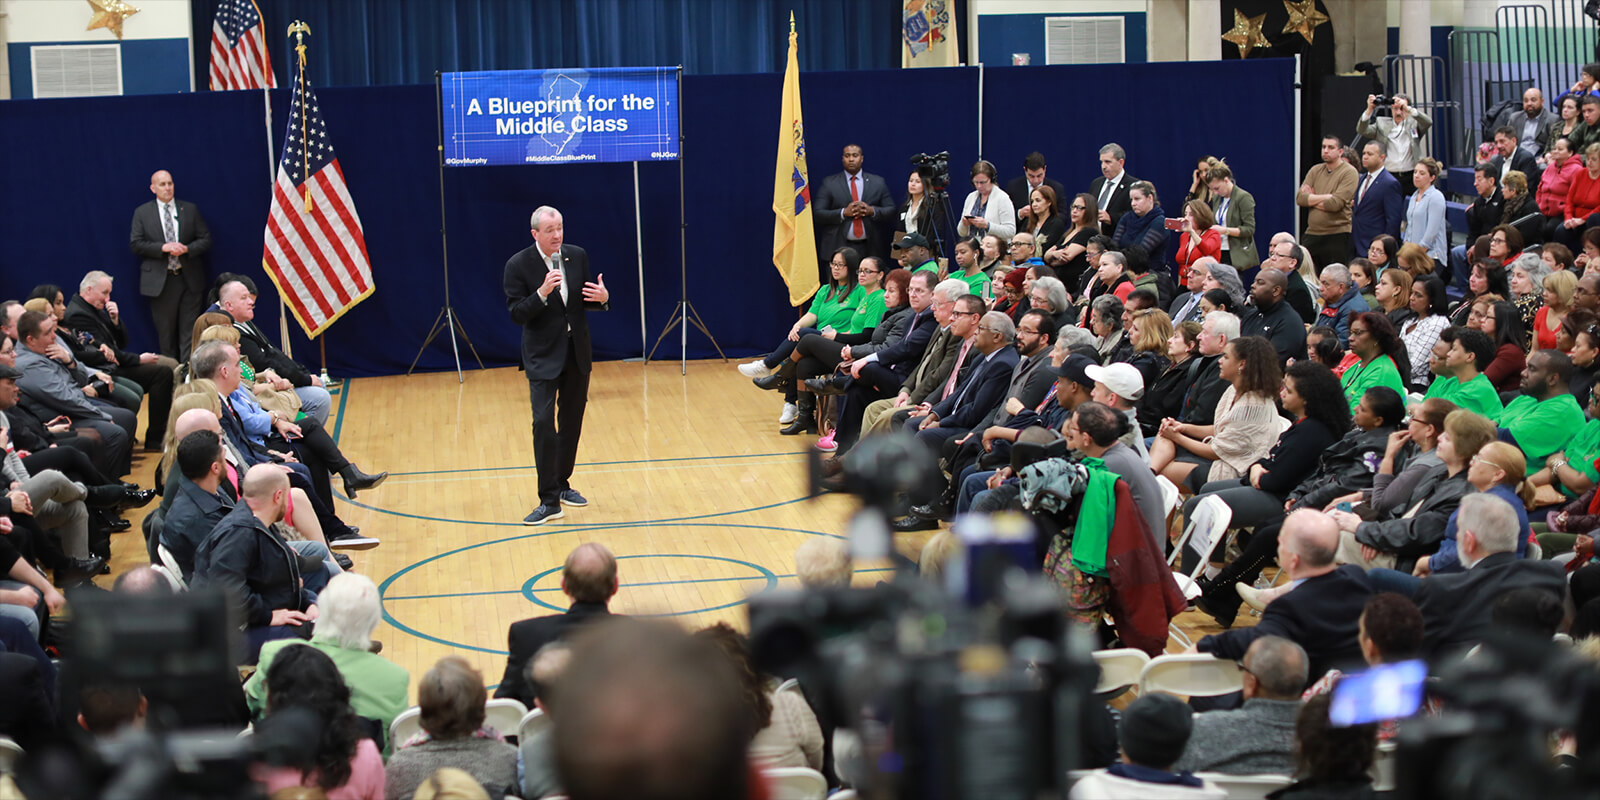 Gov. Murphy Discusses His Middle Class Plan at NJ Town Hall